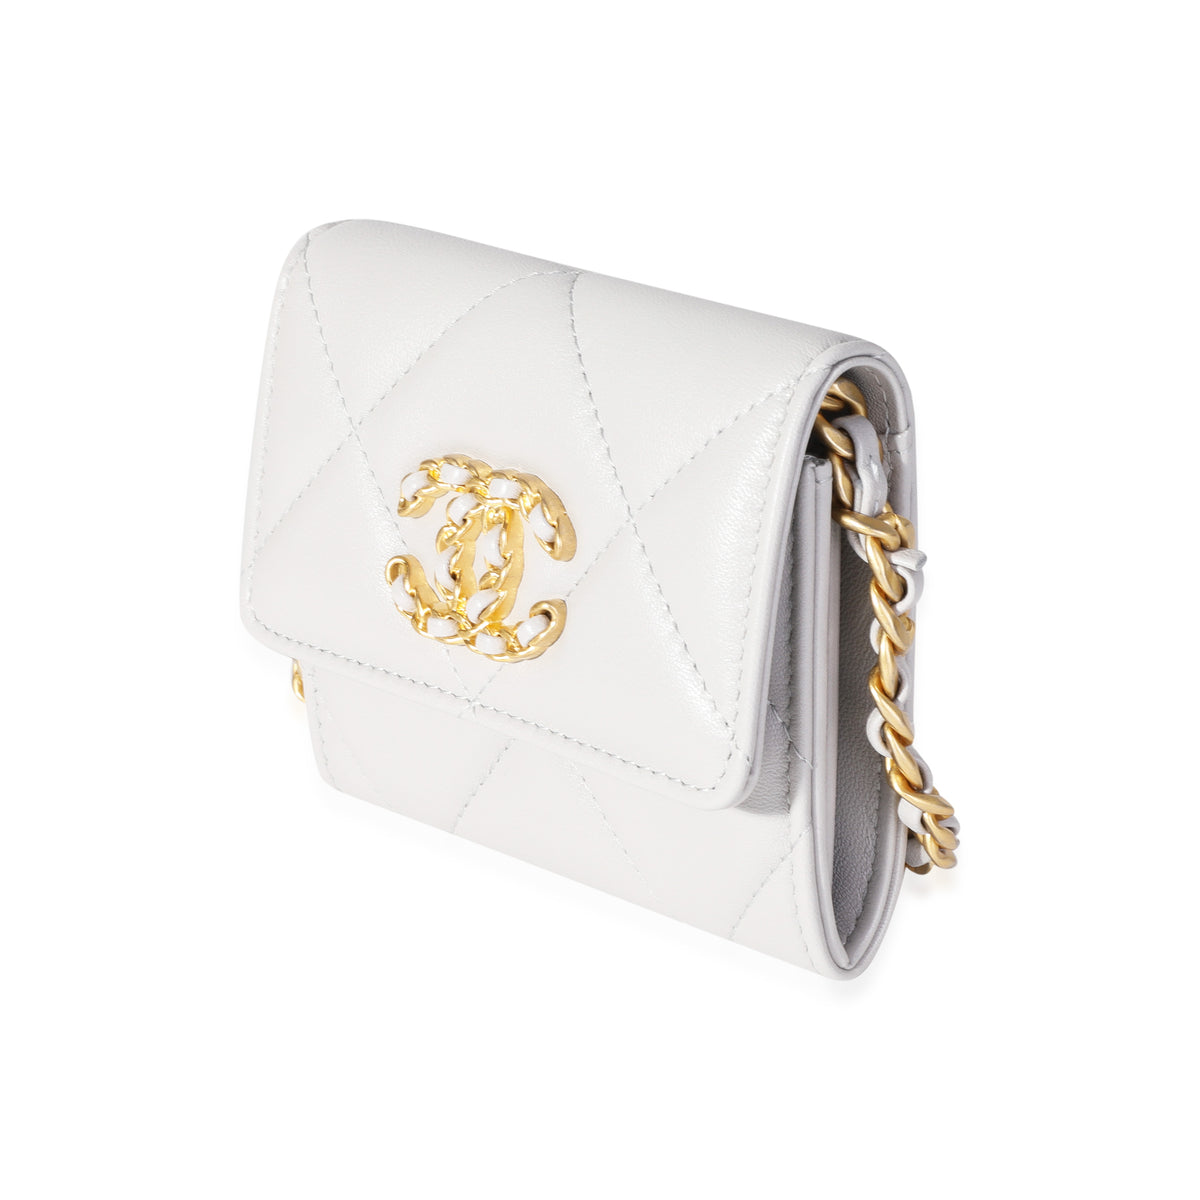 Chanel flap coin purse with chain